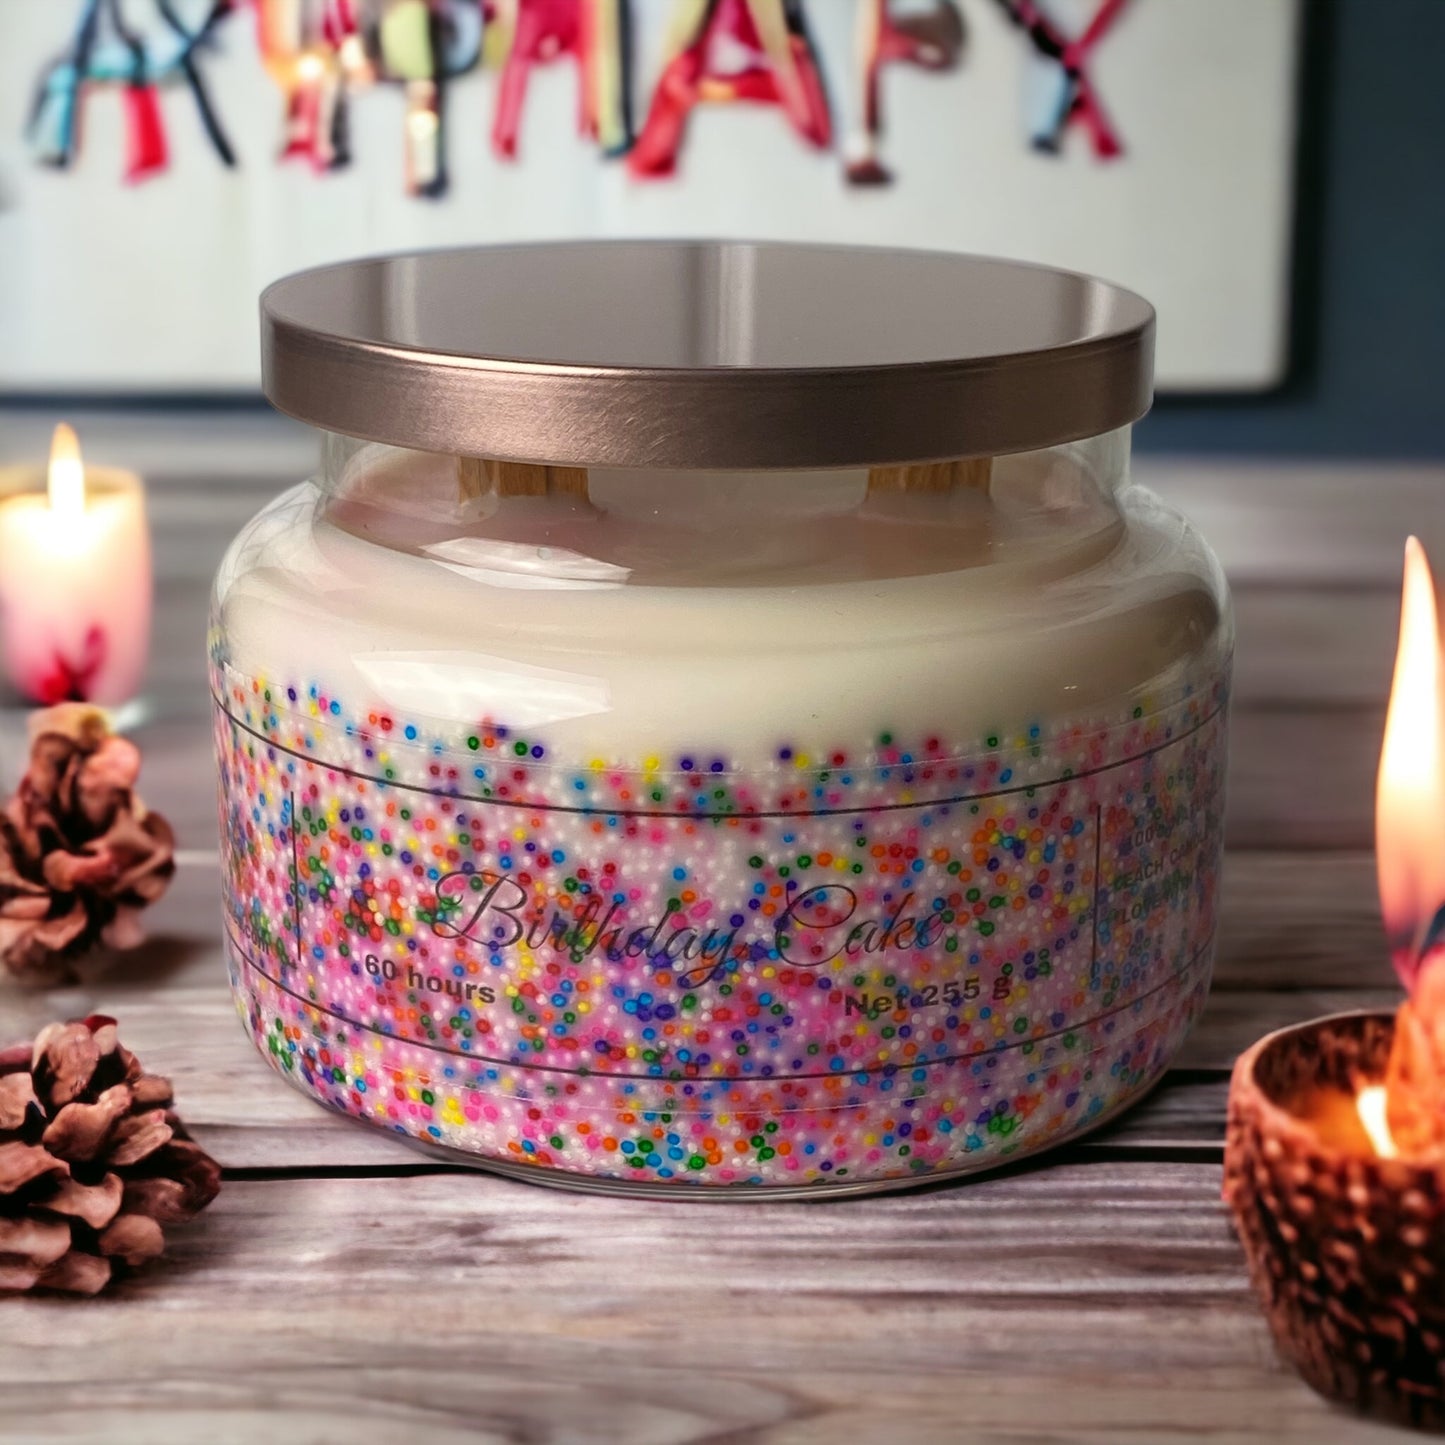 Handcrafted Birthday Cake Candles | Natural Soy Wax | High Quality Eco-Friendly | Delicious Vanilla & Cream Scented for Birthday Gifts